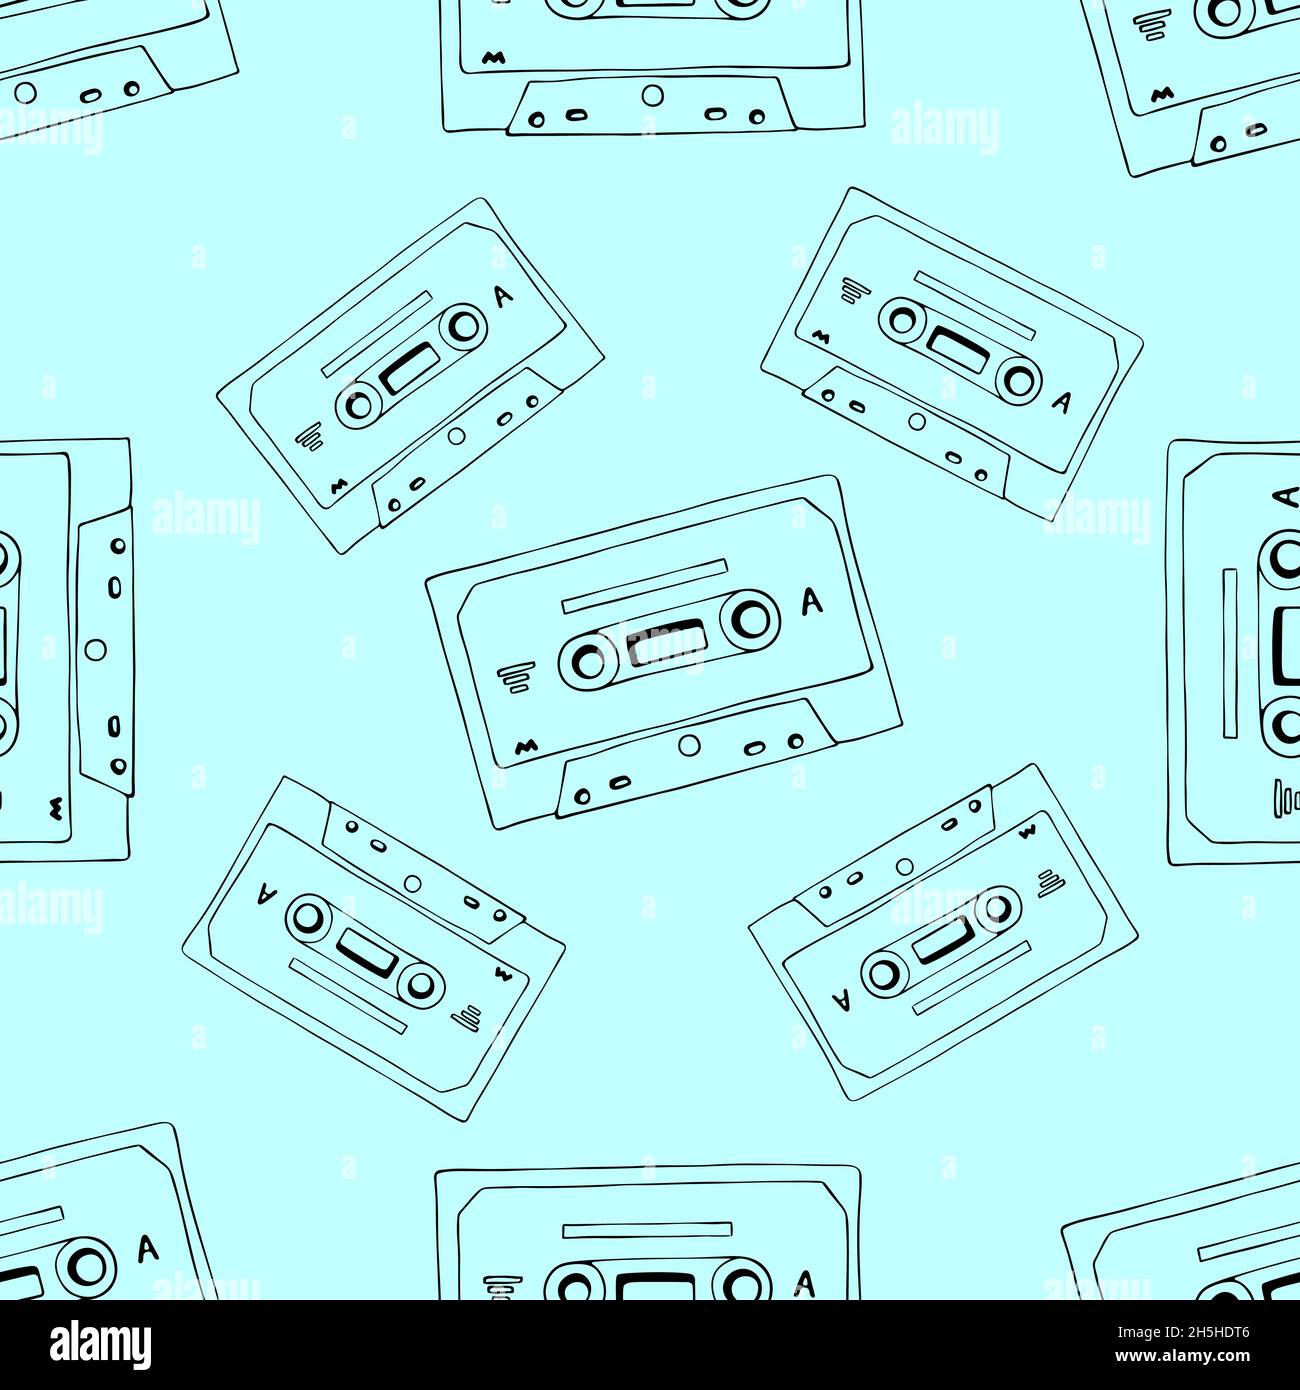 Hand drawn cassette and mixtape seamless pattern, black and blue cartoon doodle background for music technology or audio equipment concept. Stock Vector